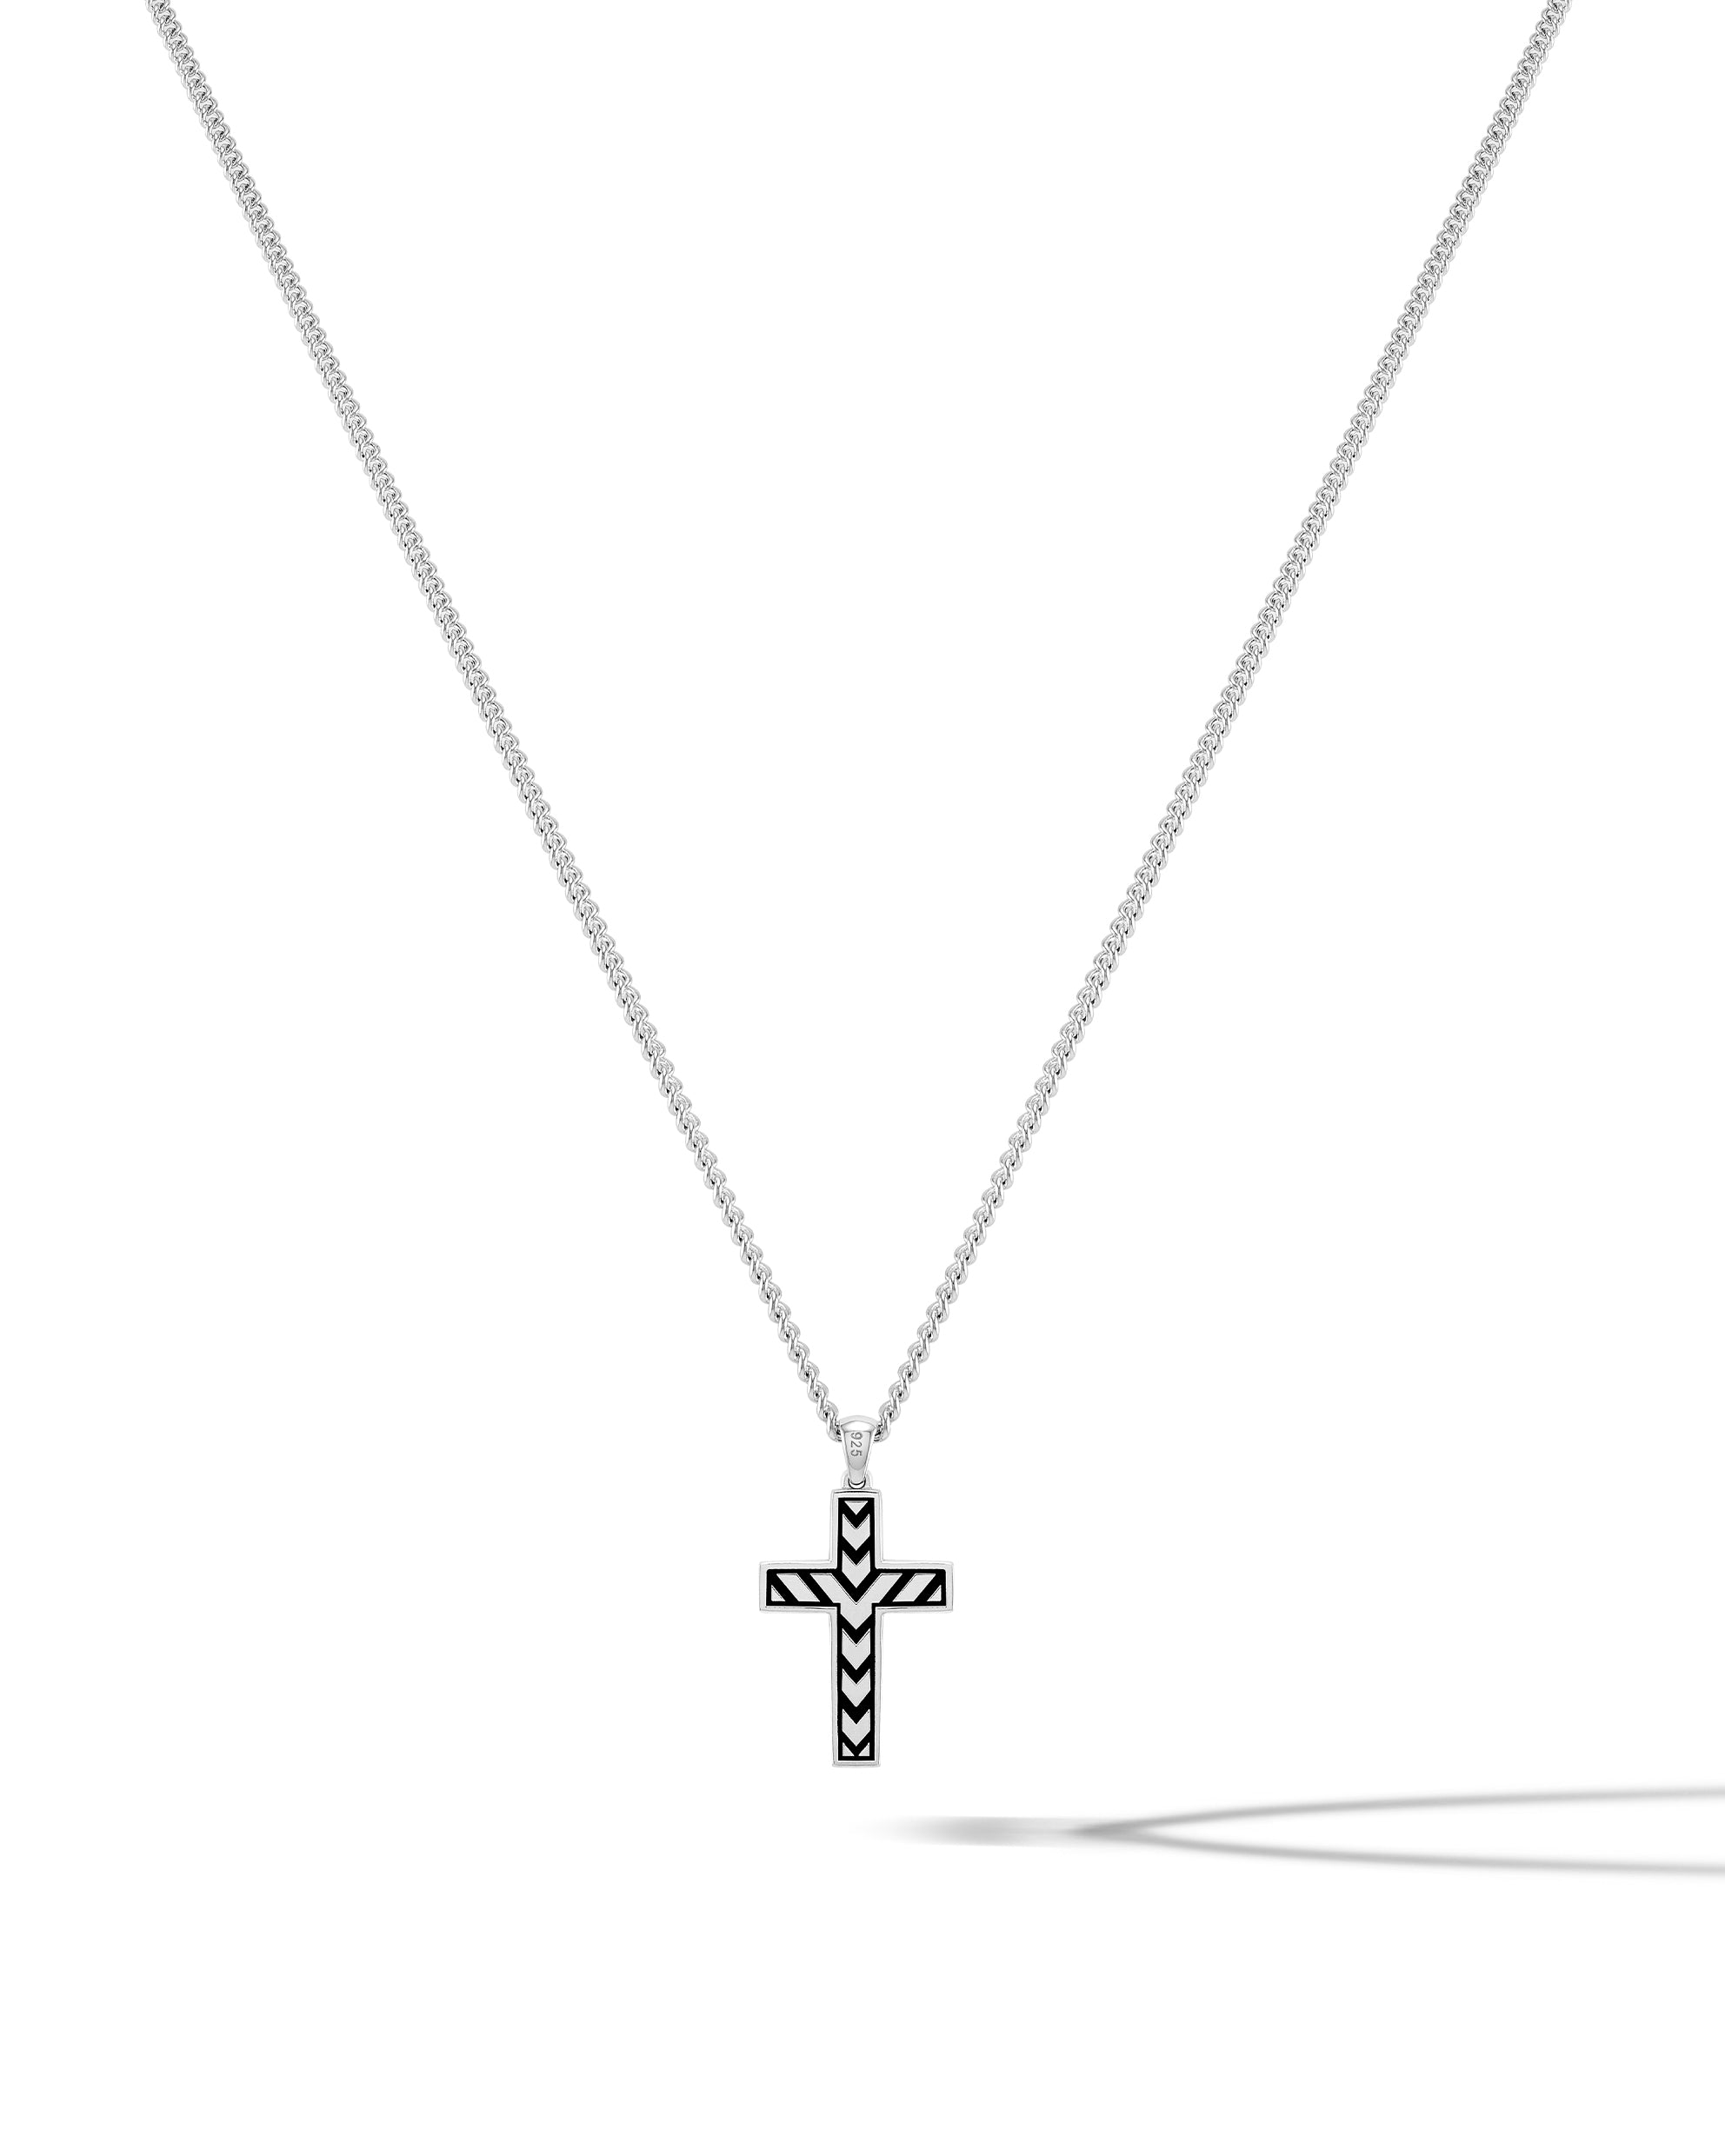 Small silver cross necklace for men, stainless steel chain necklace,  waterproof